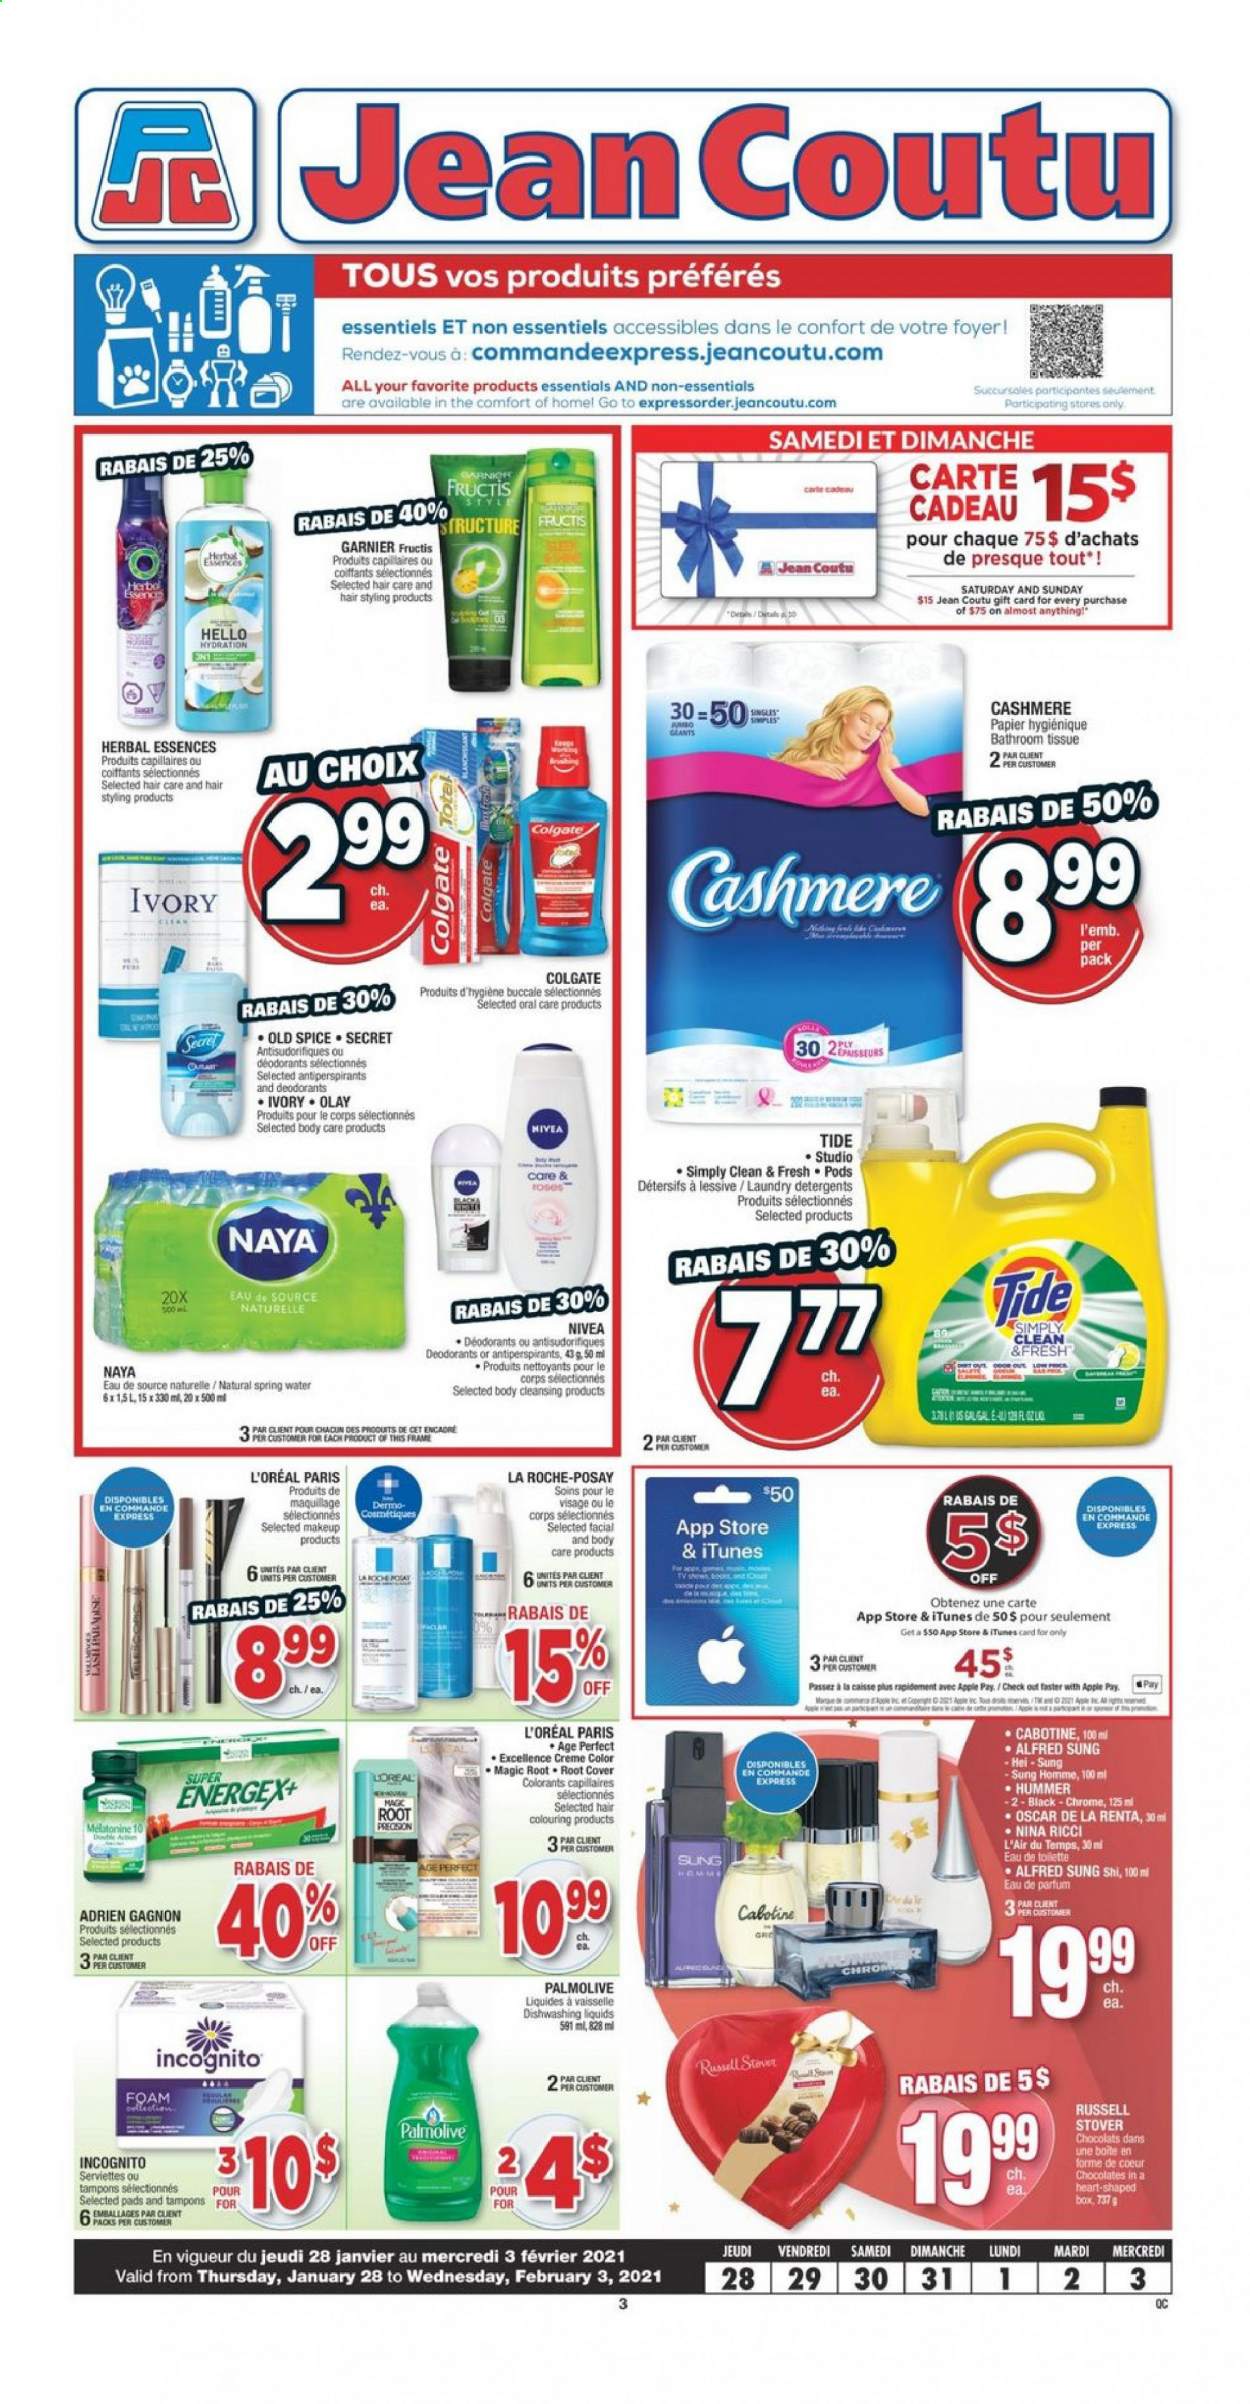 thumbnail - Jean Coutu Flyer - January 28, 2021 - February 03, 2021 - Sales products - chocolate, spice, spring water, bath tissue, Tide, Palmolive, tampons, L’Oréal, La Roche-Posay, Olay, Herbal Essences, Fructis, makeup, Garnier, Nivea, Old Spice, deodorant. Page 1.